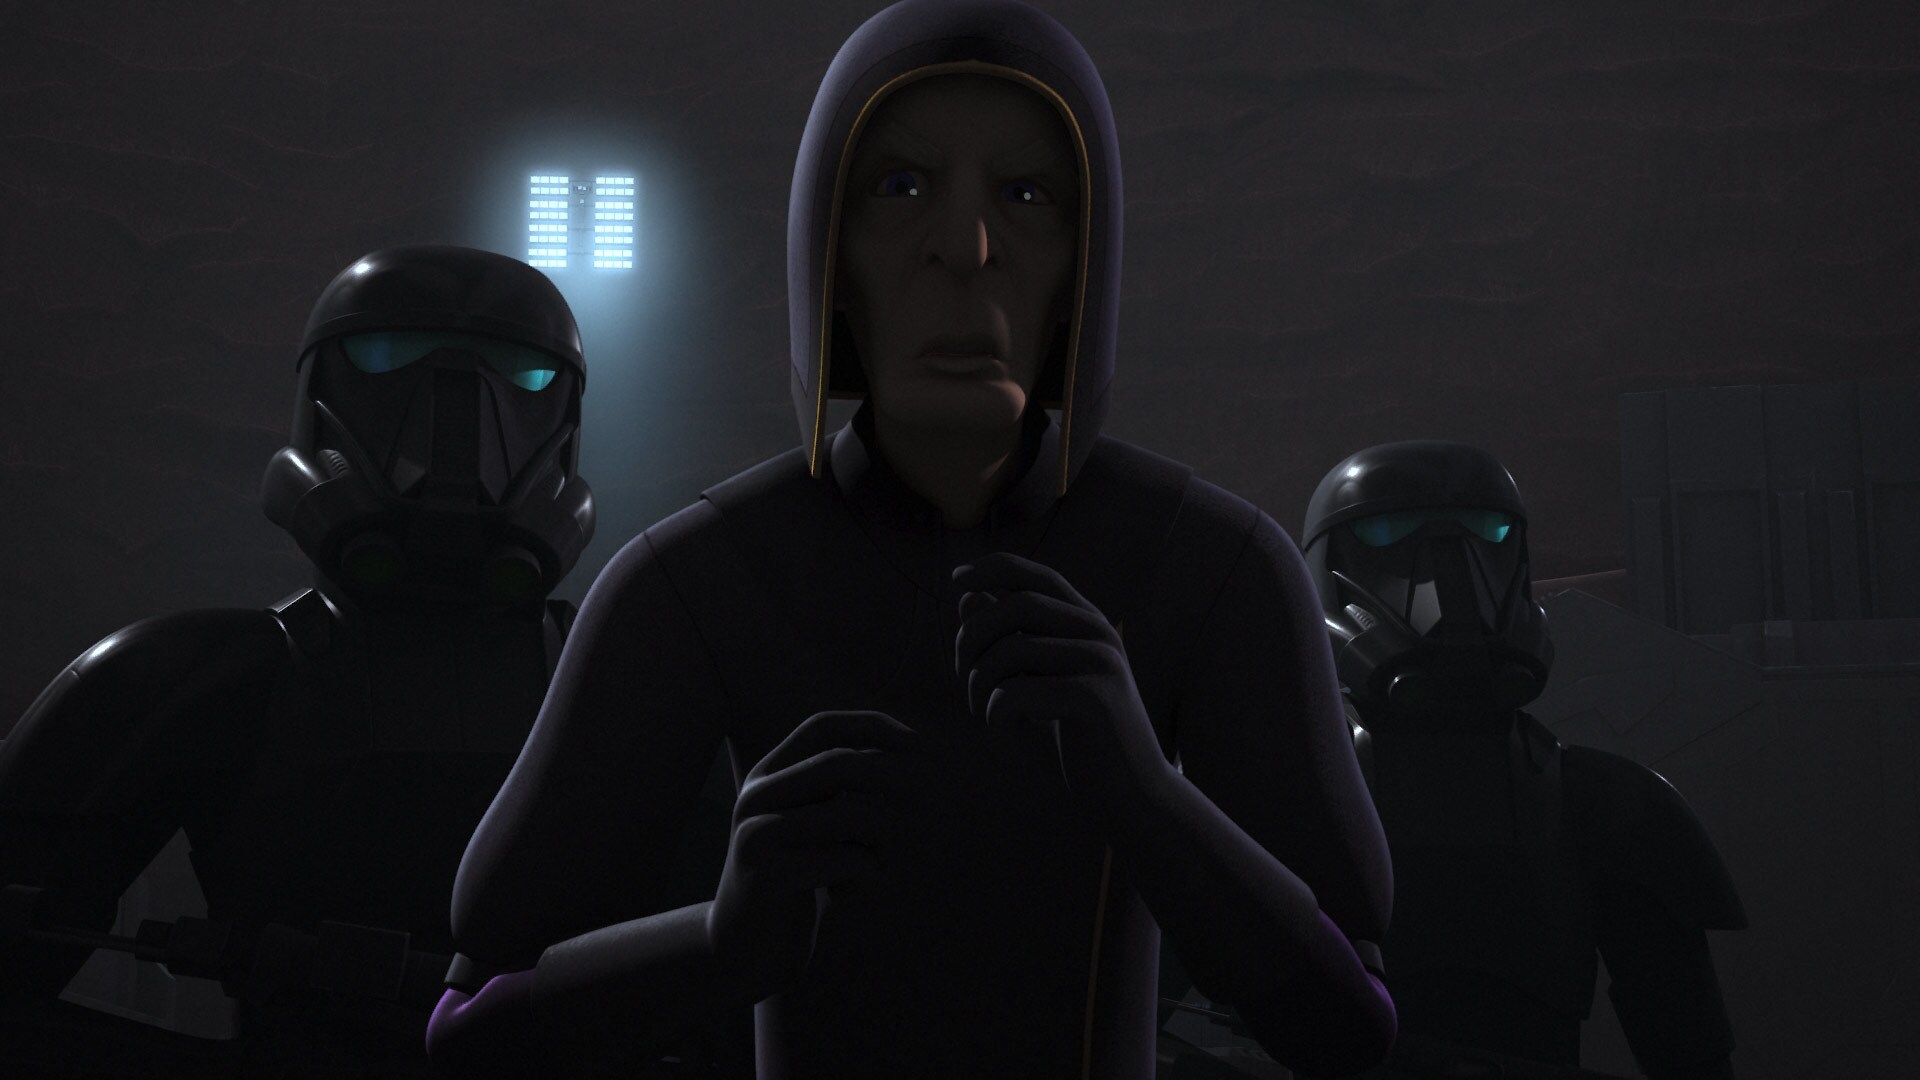 With biker scout armor as a disguise, Ezra and Sabine get close to whatever it is the Empire is u...